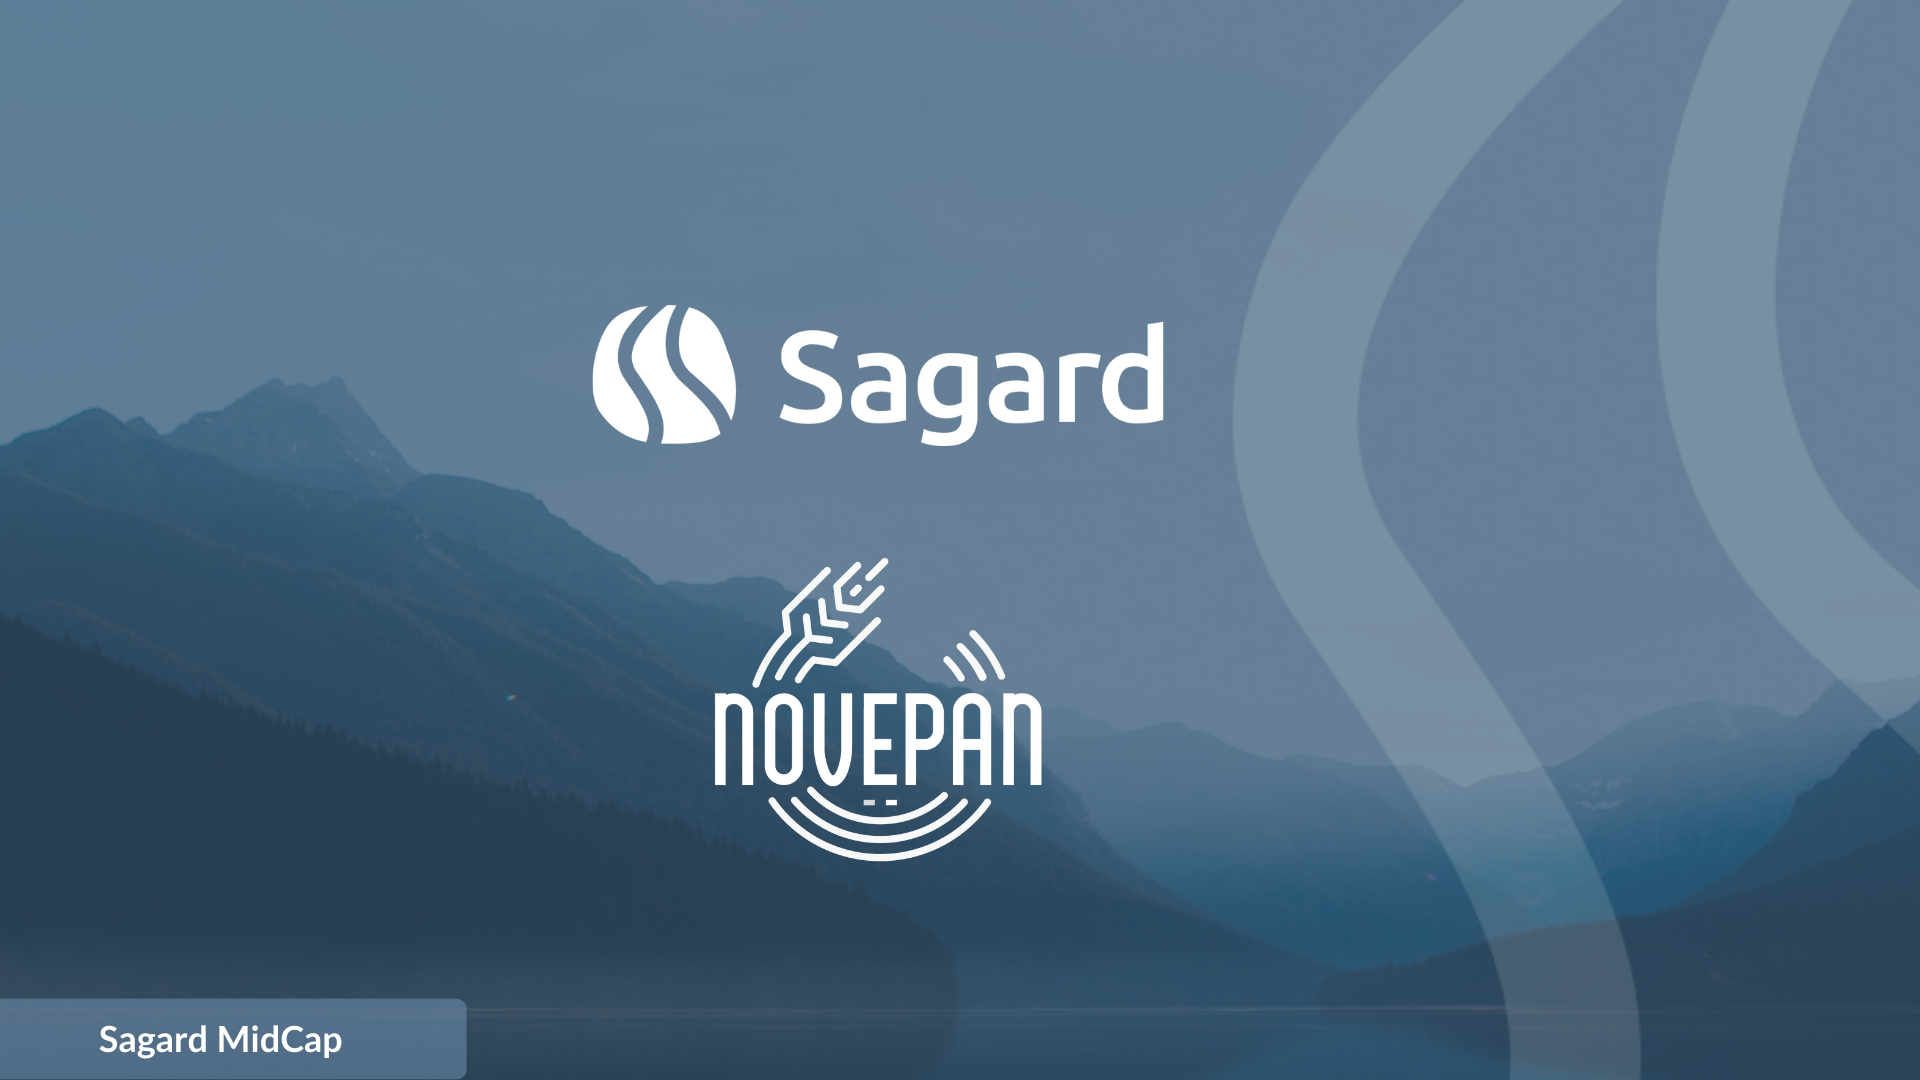 Sagard has finalized the acquisition of Novepan from Azulis